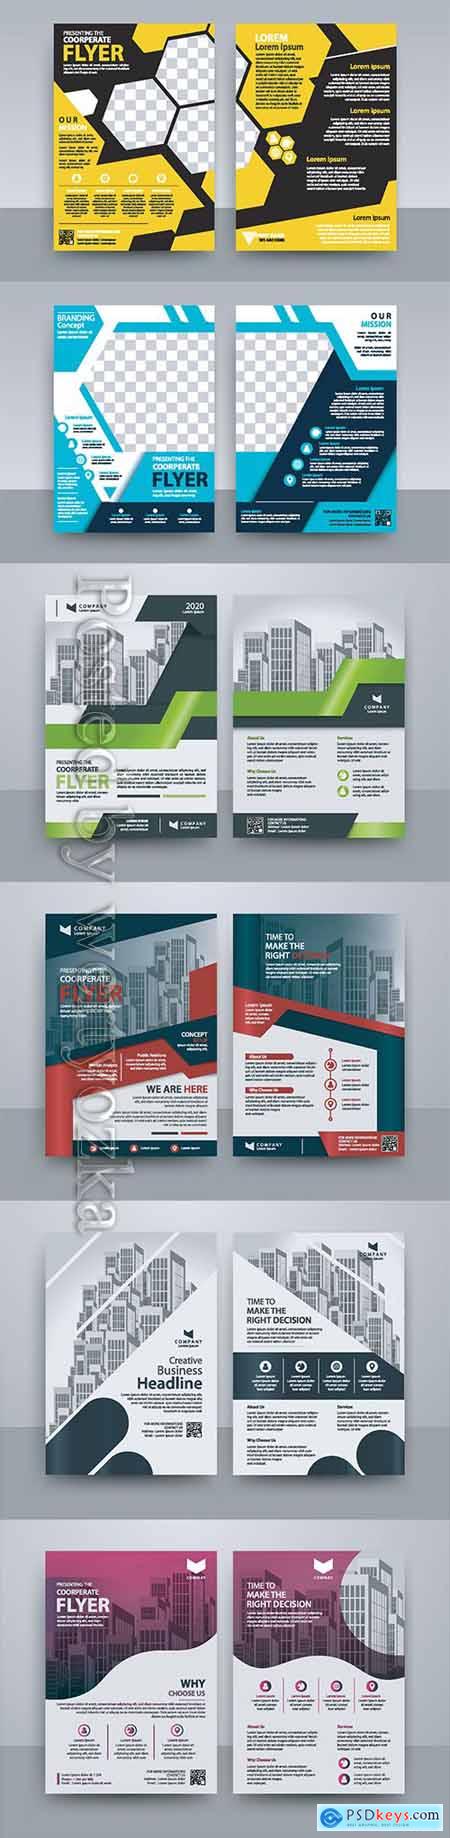 Business vector template for brochure, annual report, magazine874